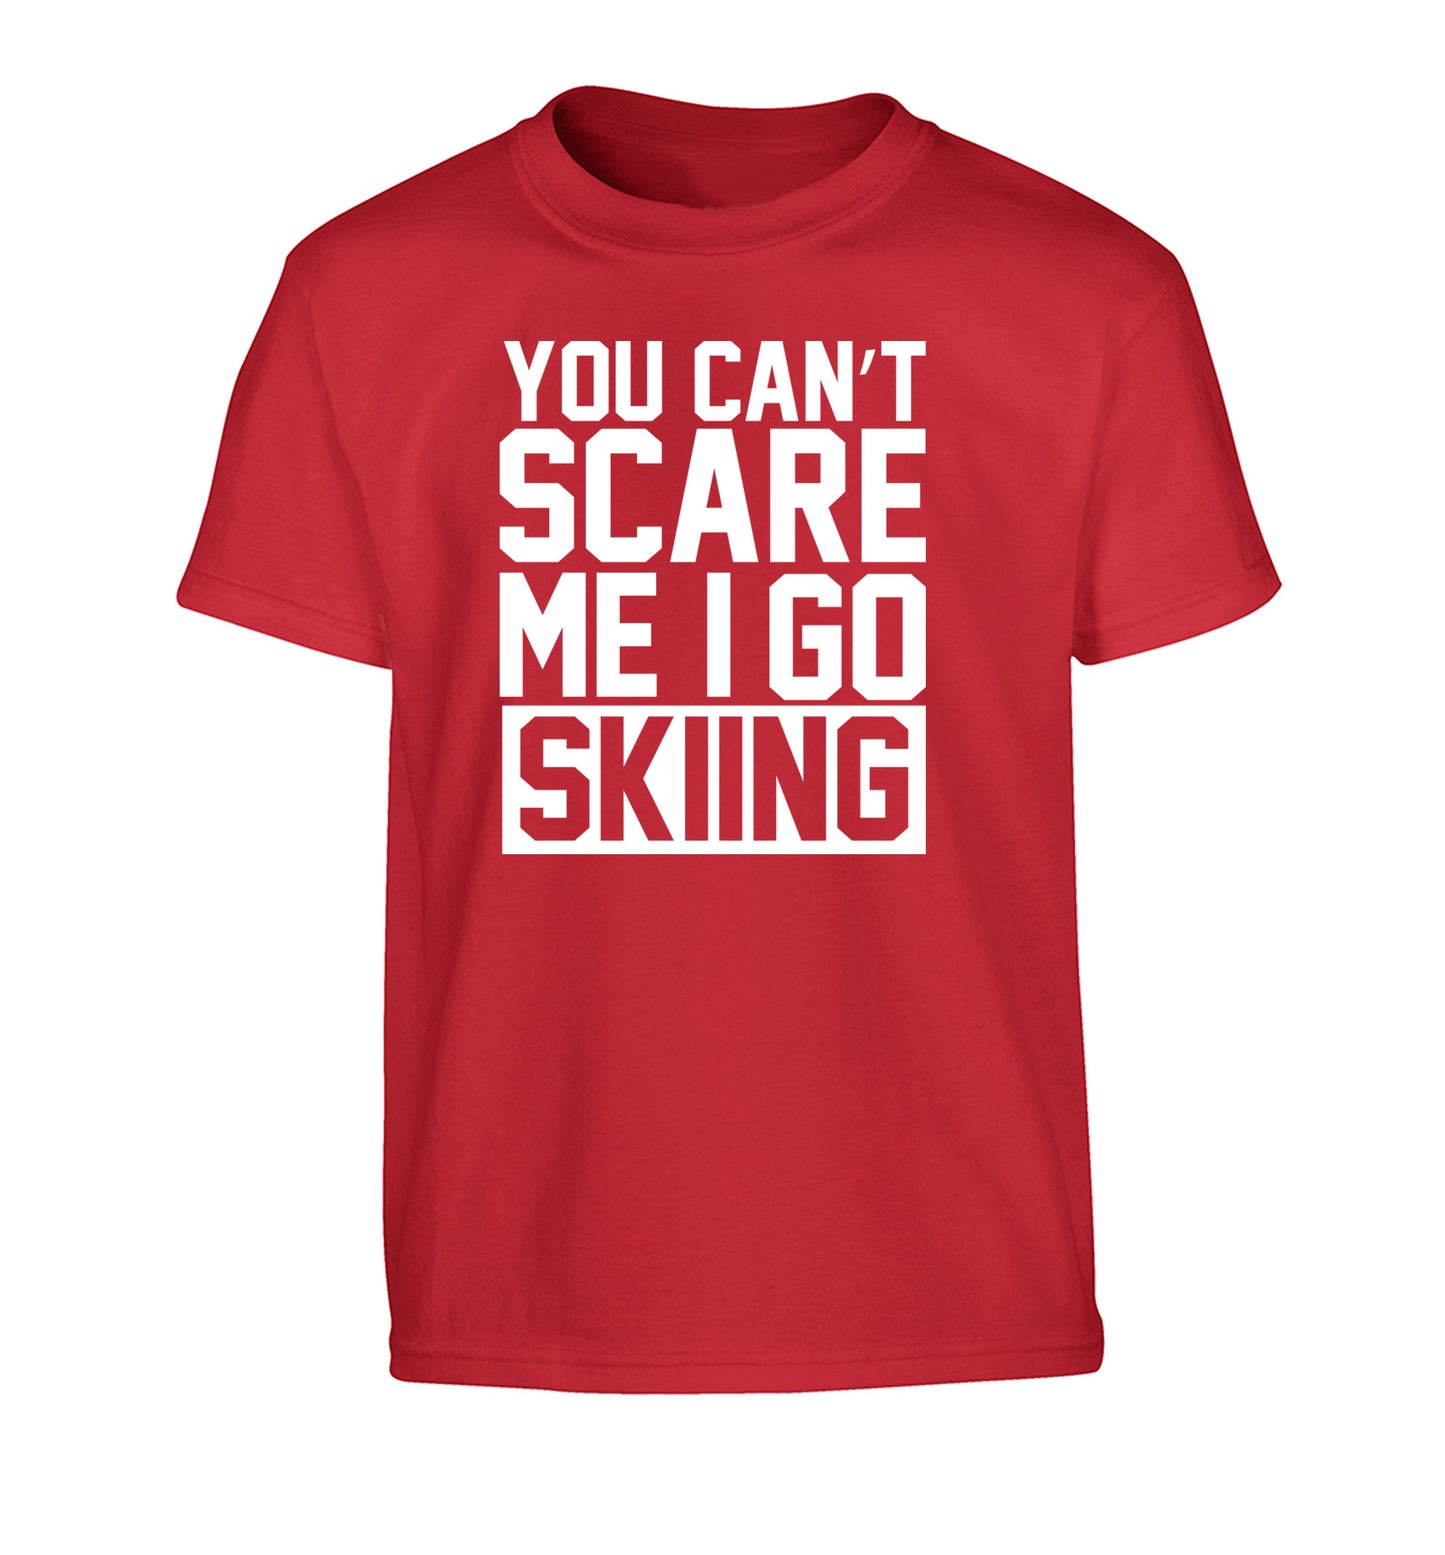 You can't scare me I go skiing Children's red Tshirt 12-14 Years